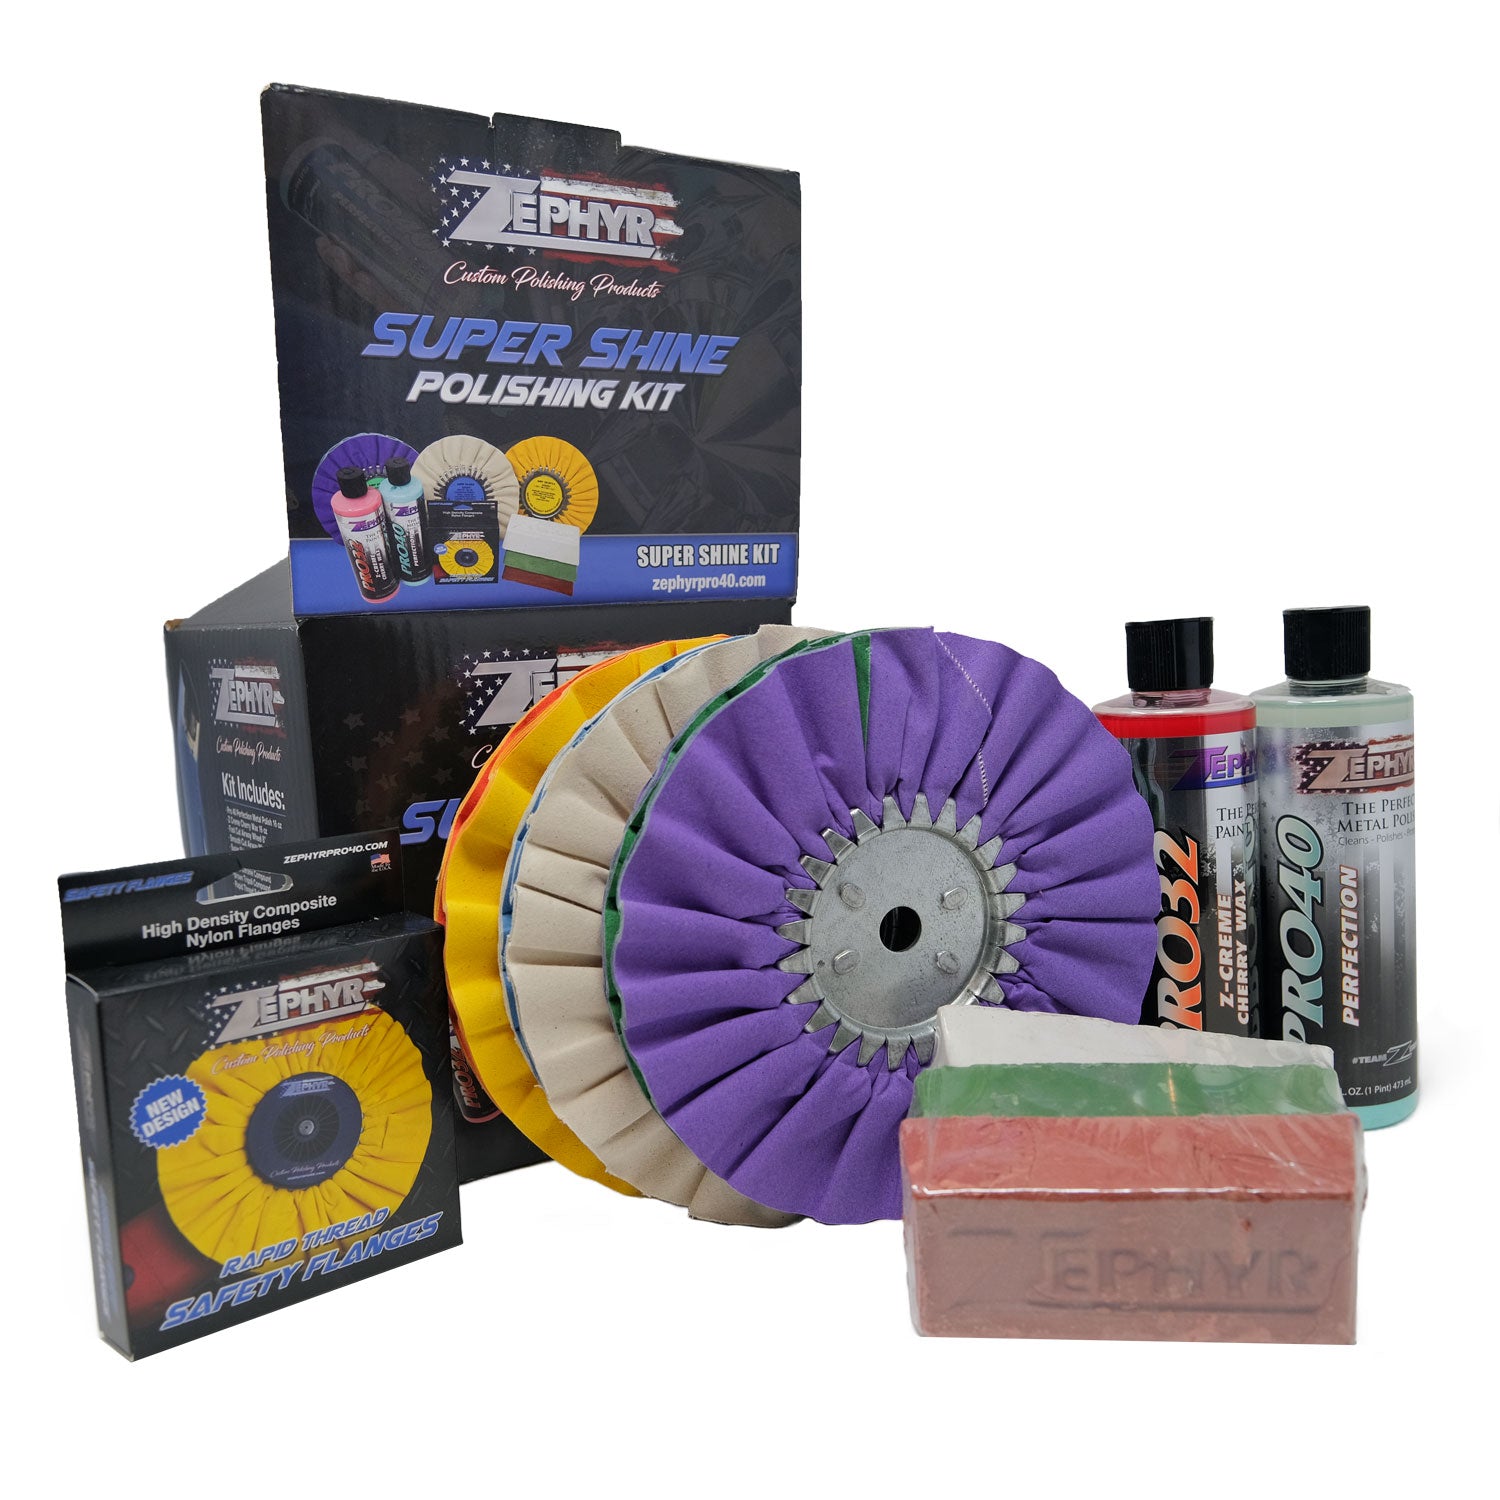 Stainless Steel Buffing and Polishing Kit - 8” Airway Buffs and